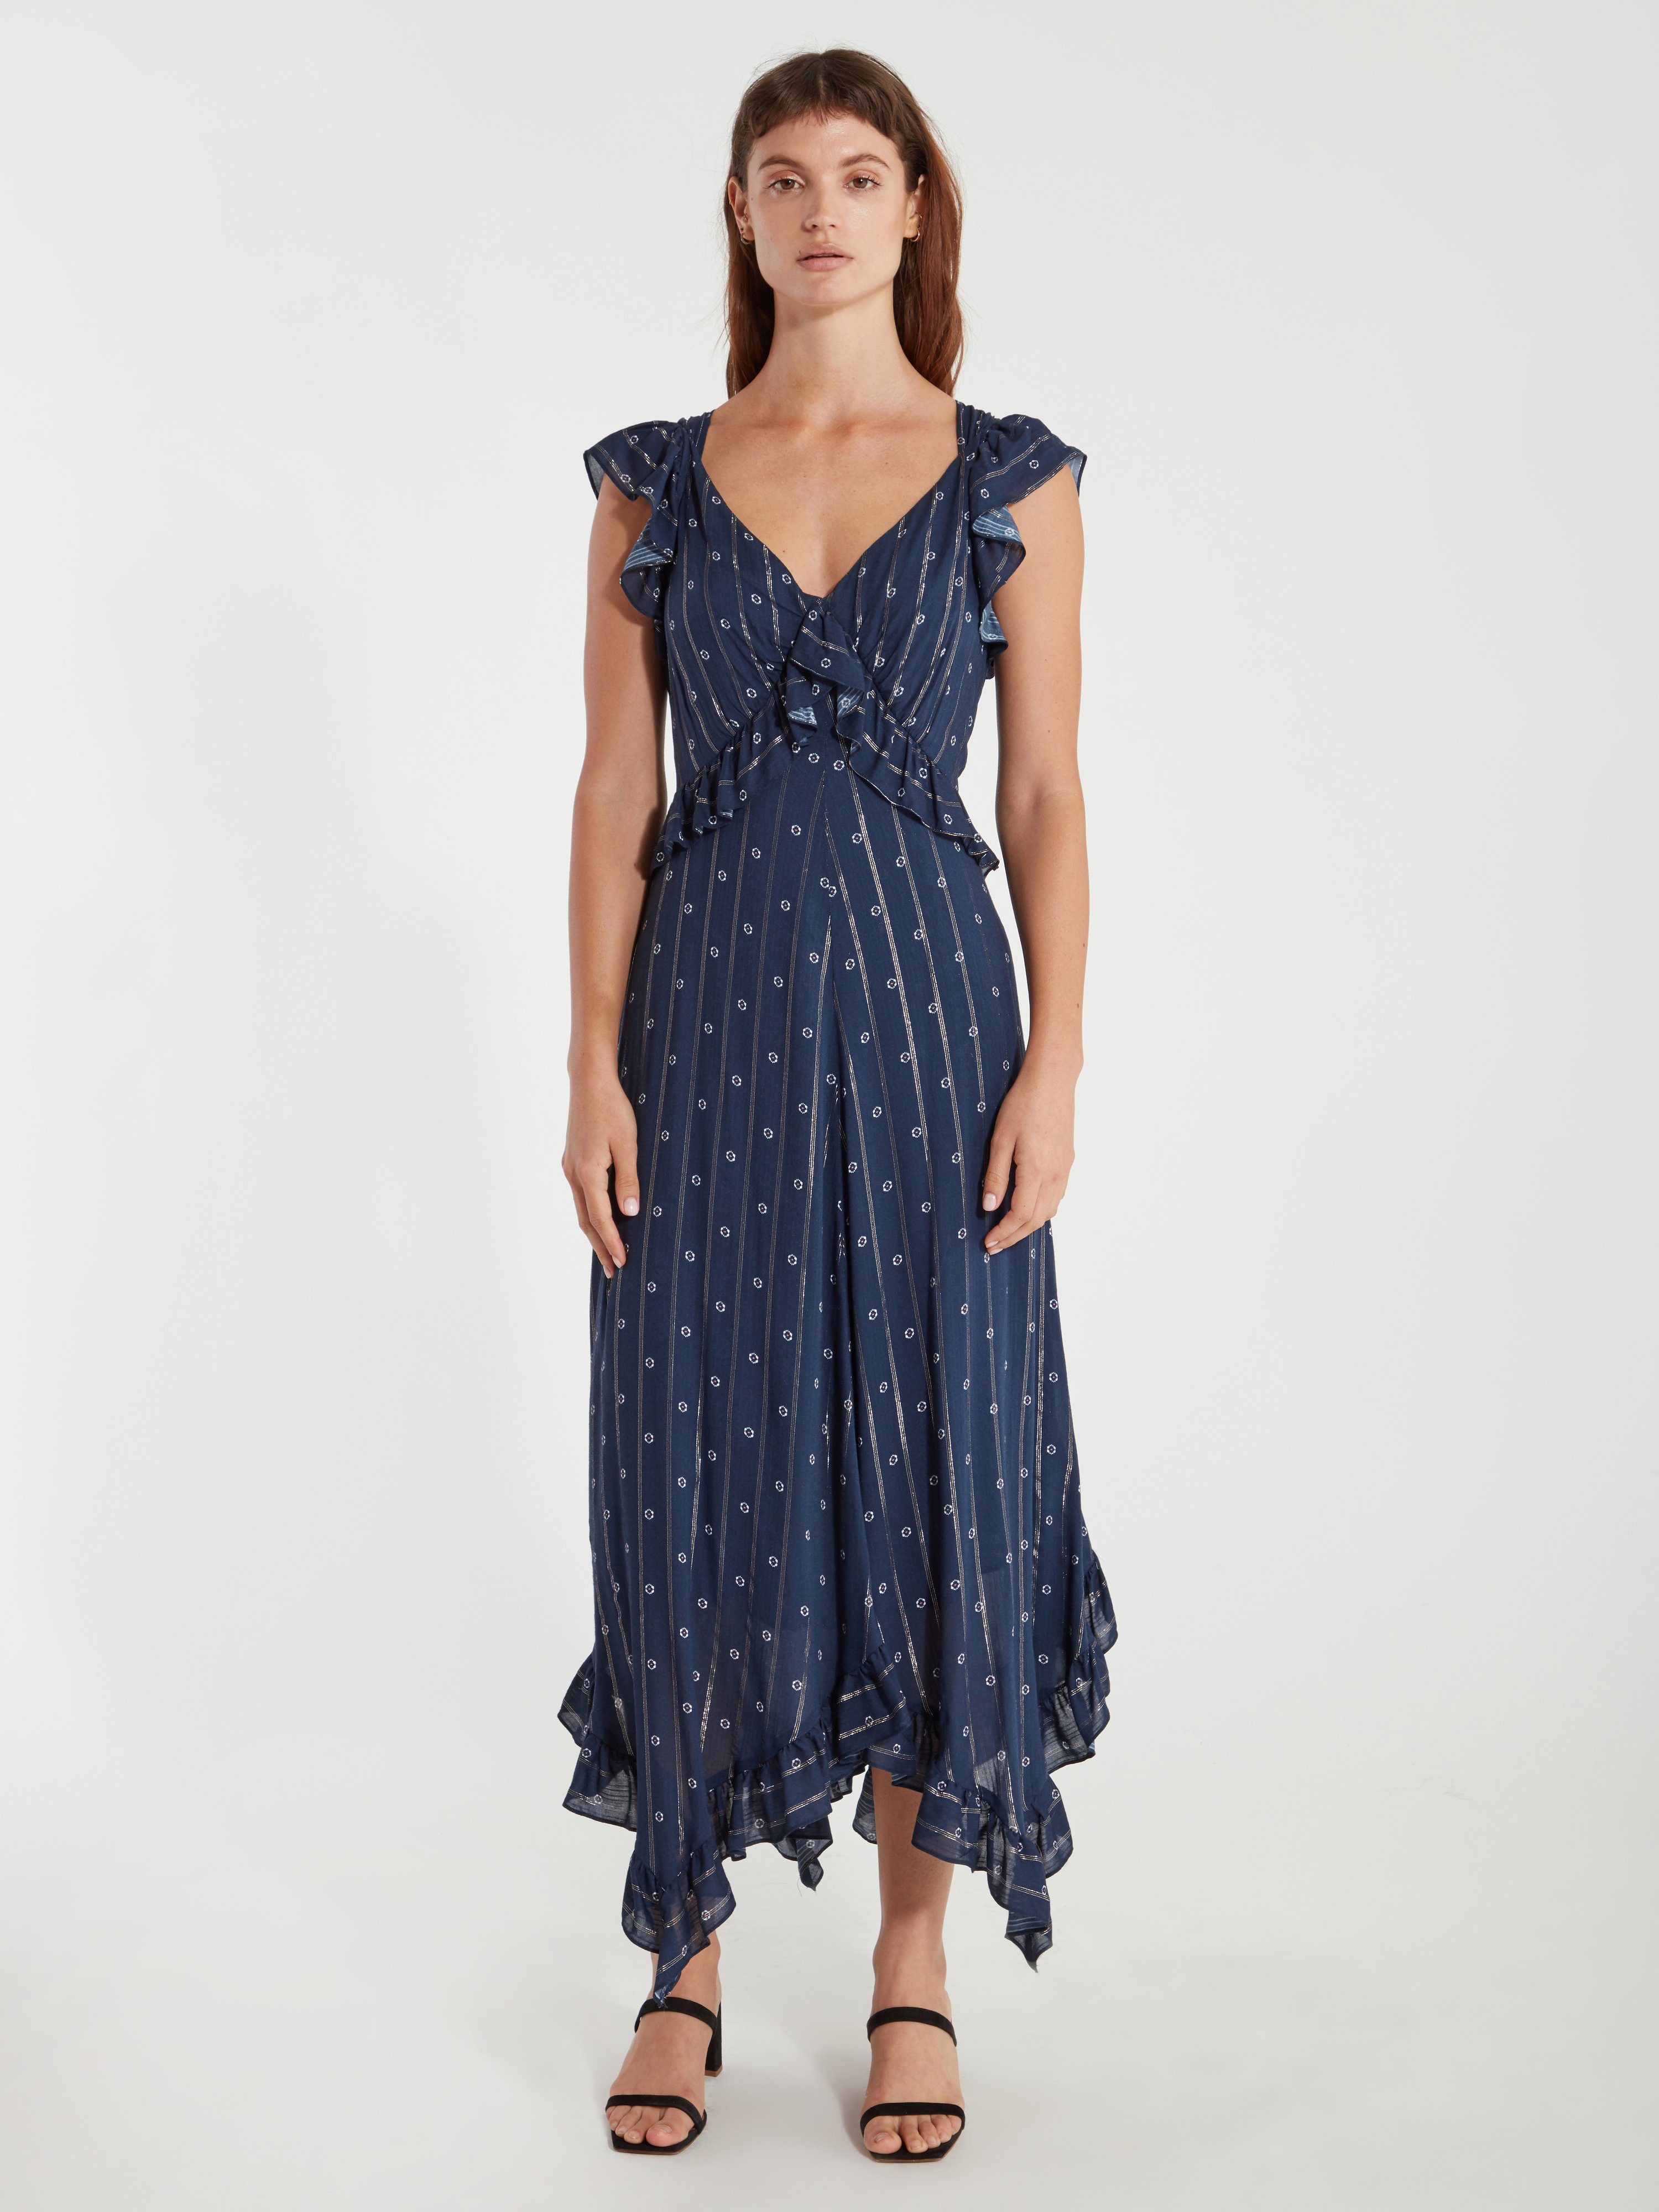 Icons Objects Of Devotion The Day Ruffle Midi Dress In Navy White Indian Dot